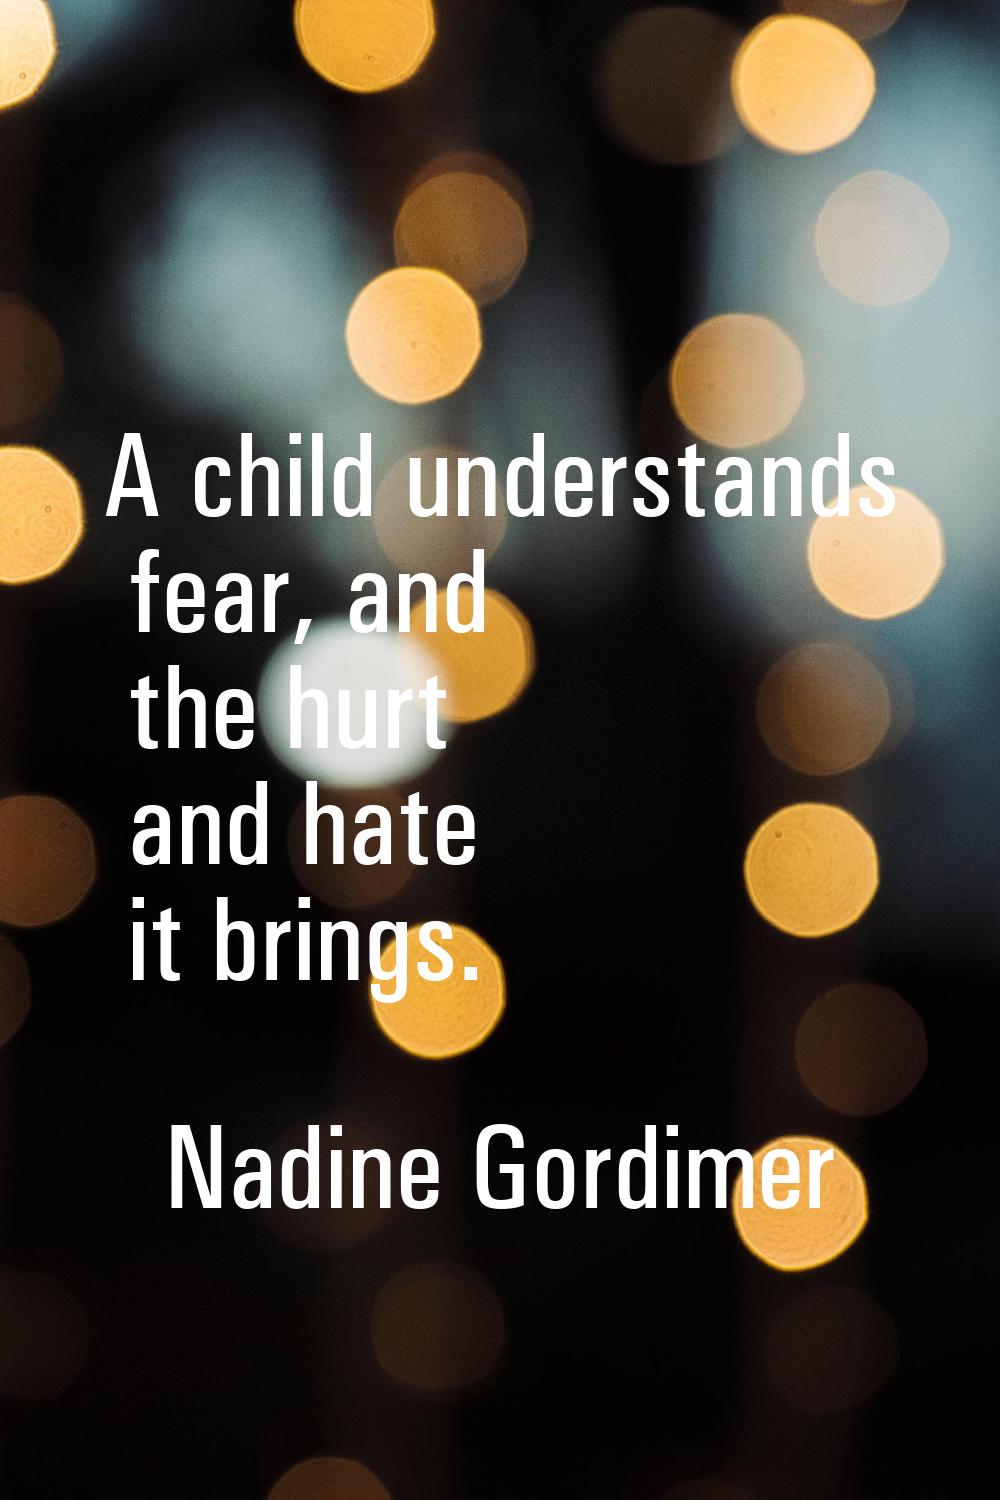 A child understands fear, and the hurt and hate it brings.